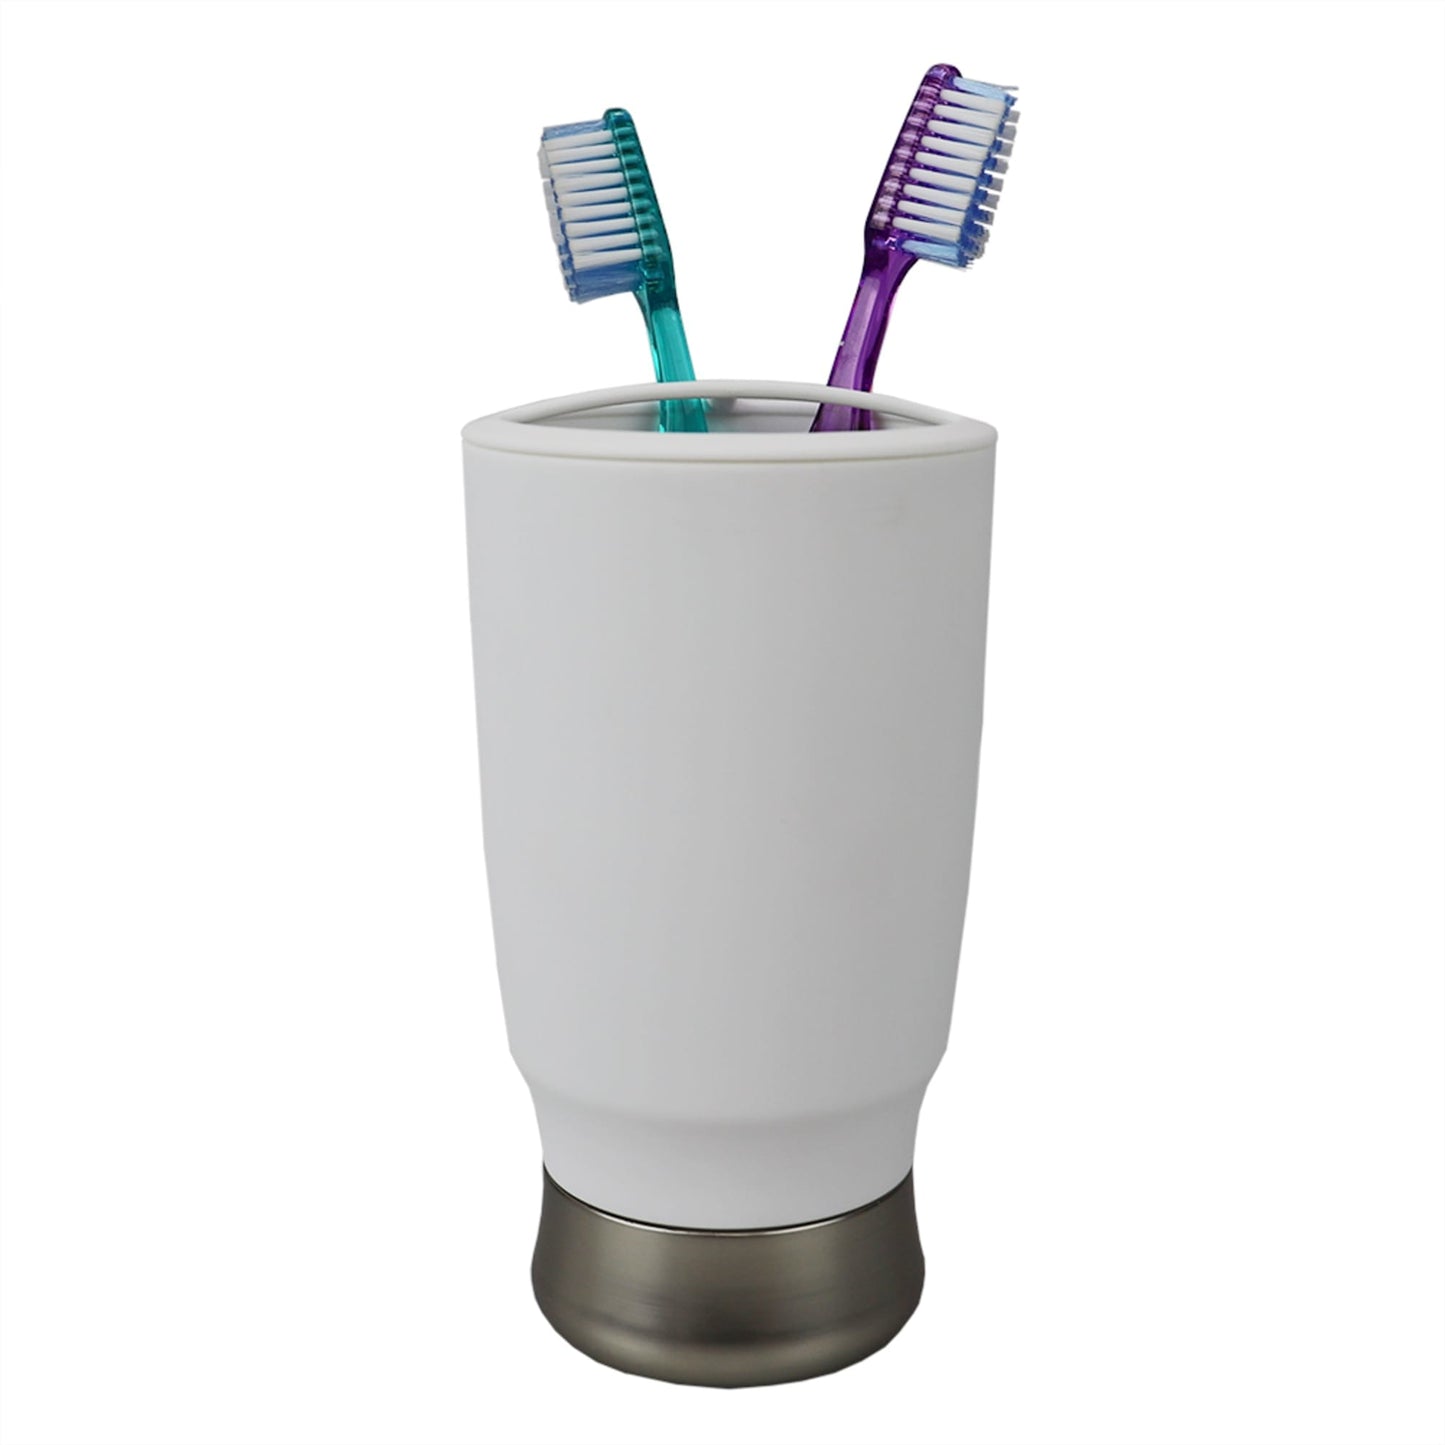 3 Section Rubberized Plastic Tooth Brush Holder, White